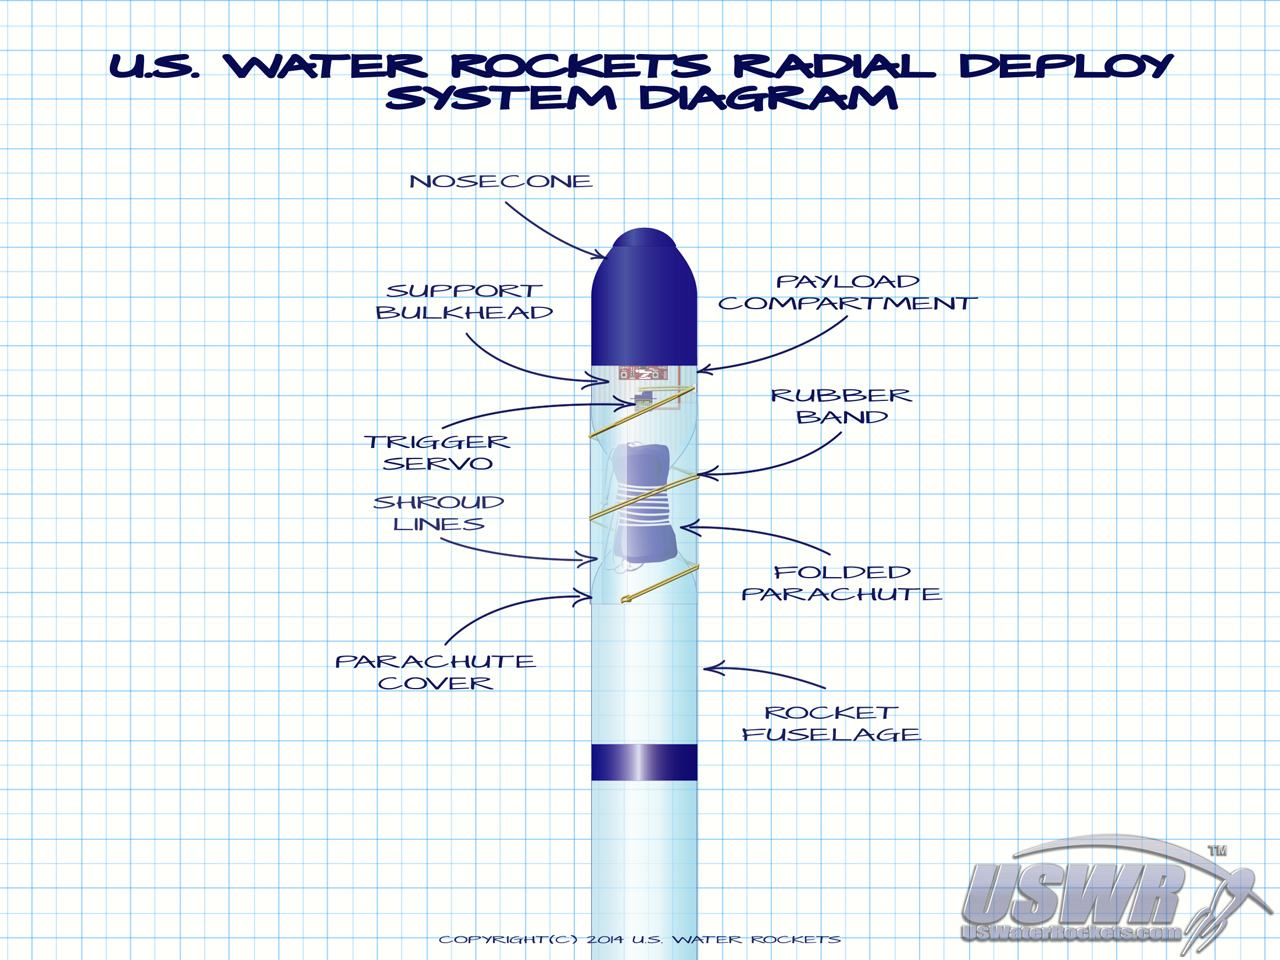 Radial Deploy System Components Diagram.